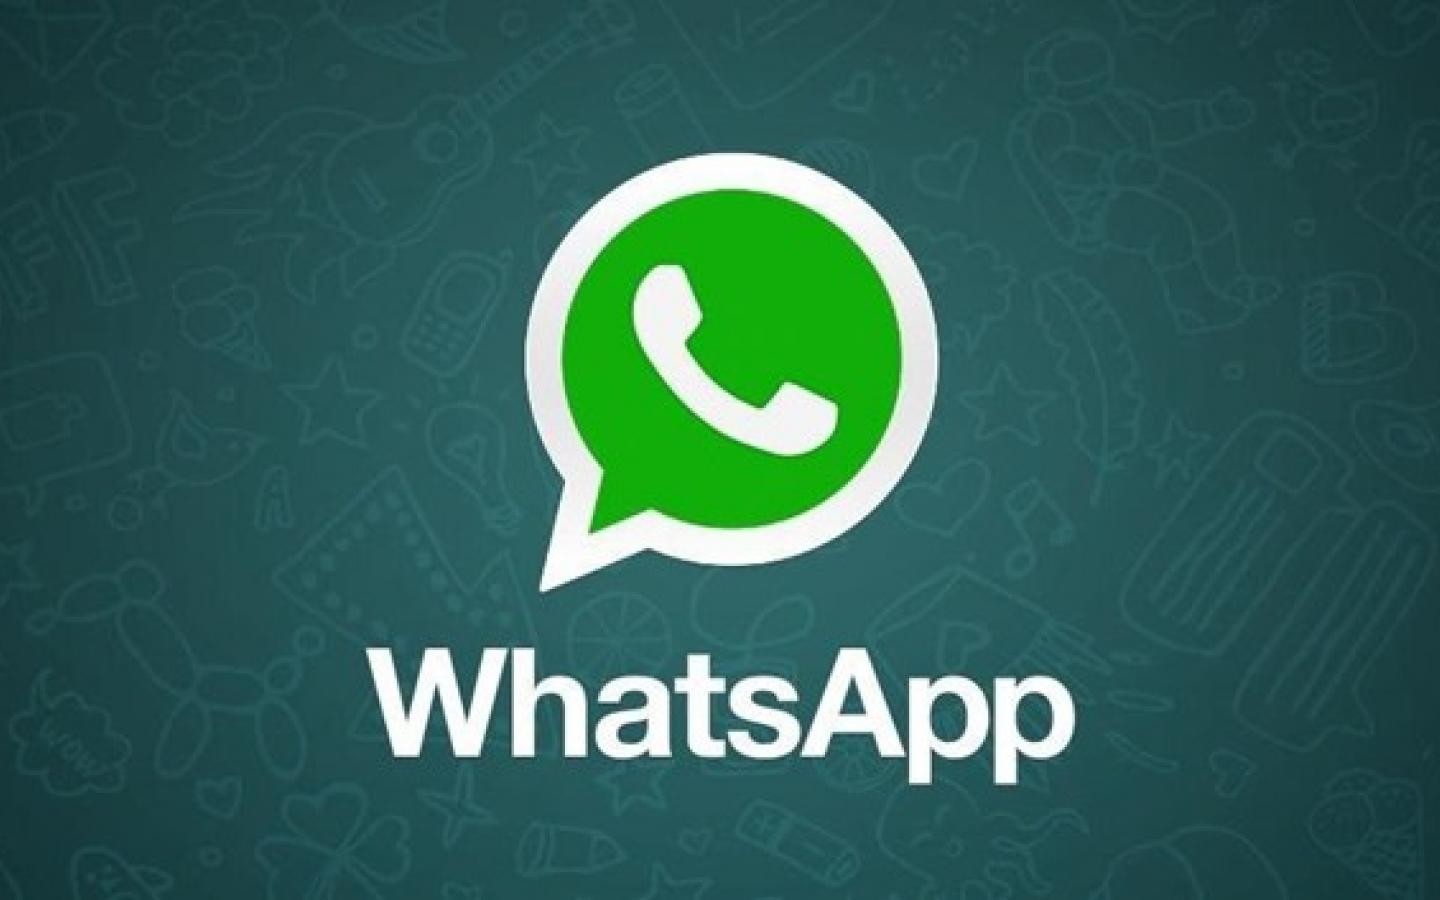 WhatsApp now lets users send 30 audio files at once